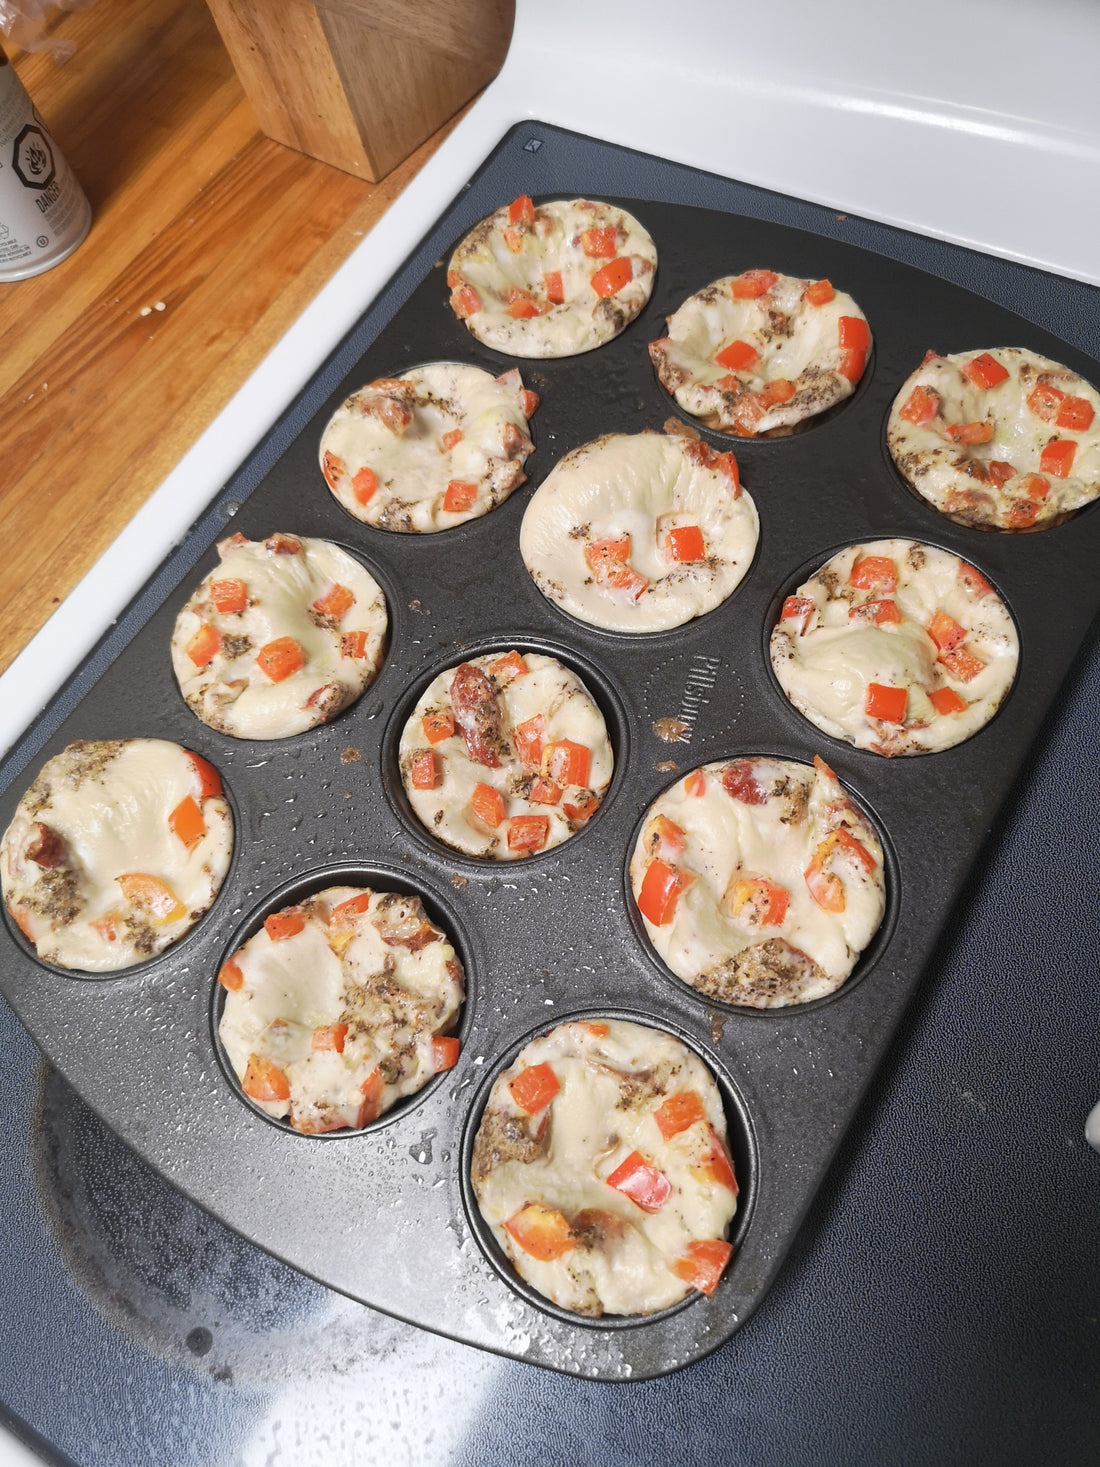 Meal Monday: Easy Egg Muffins